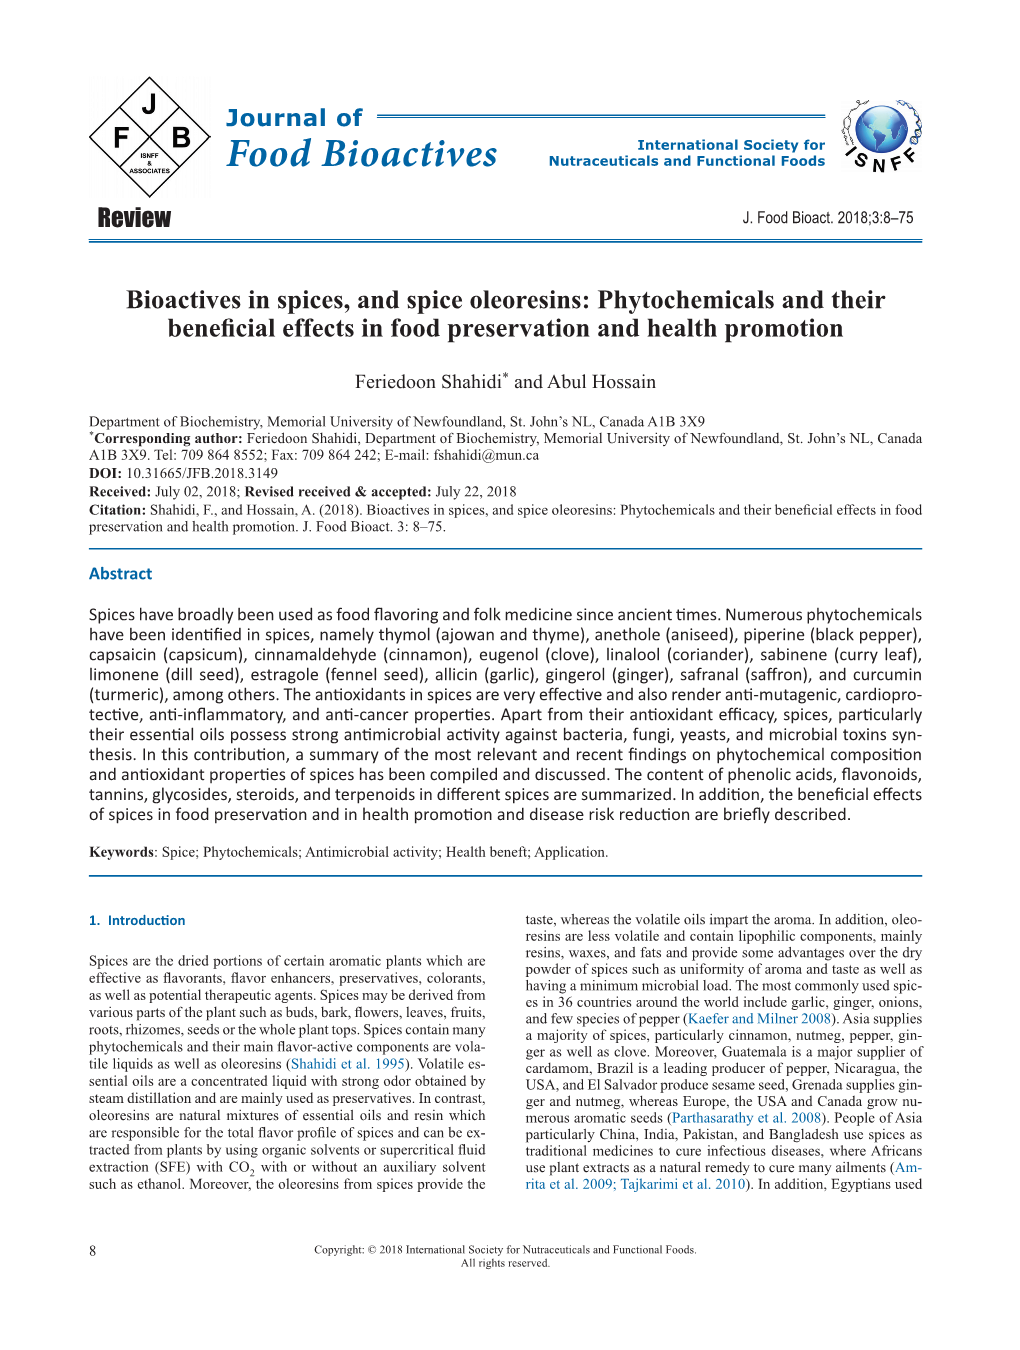 Bioactives in Spices, and Spice Oleoresins: Phytochemicals and Their Beneficial Effects in Food Preservation and Health Promotion